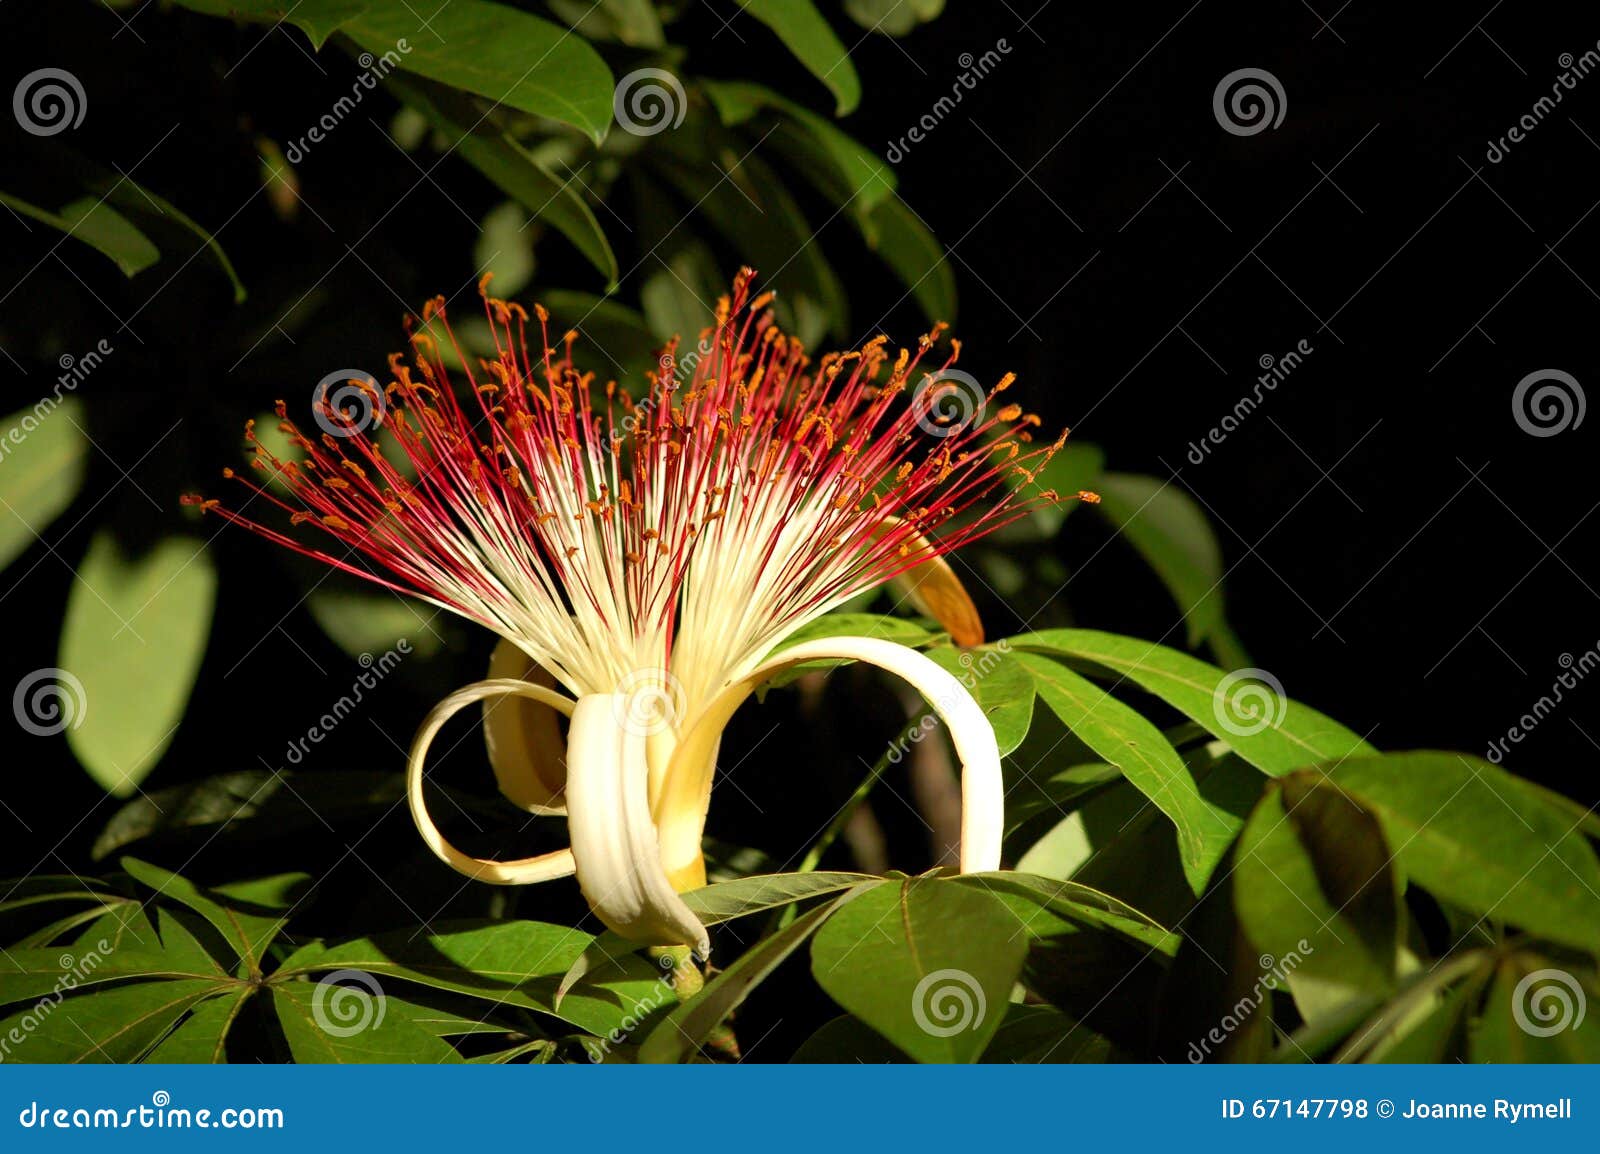 tropical provision tree flower in belize jungle